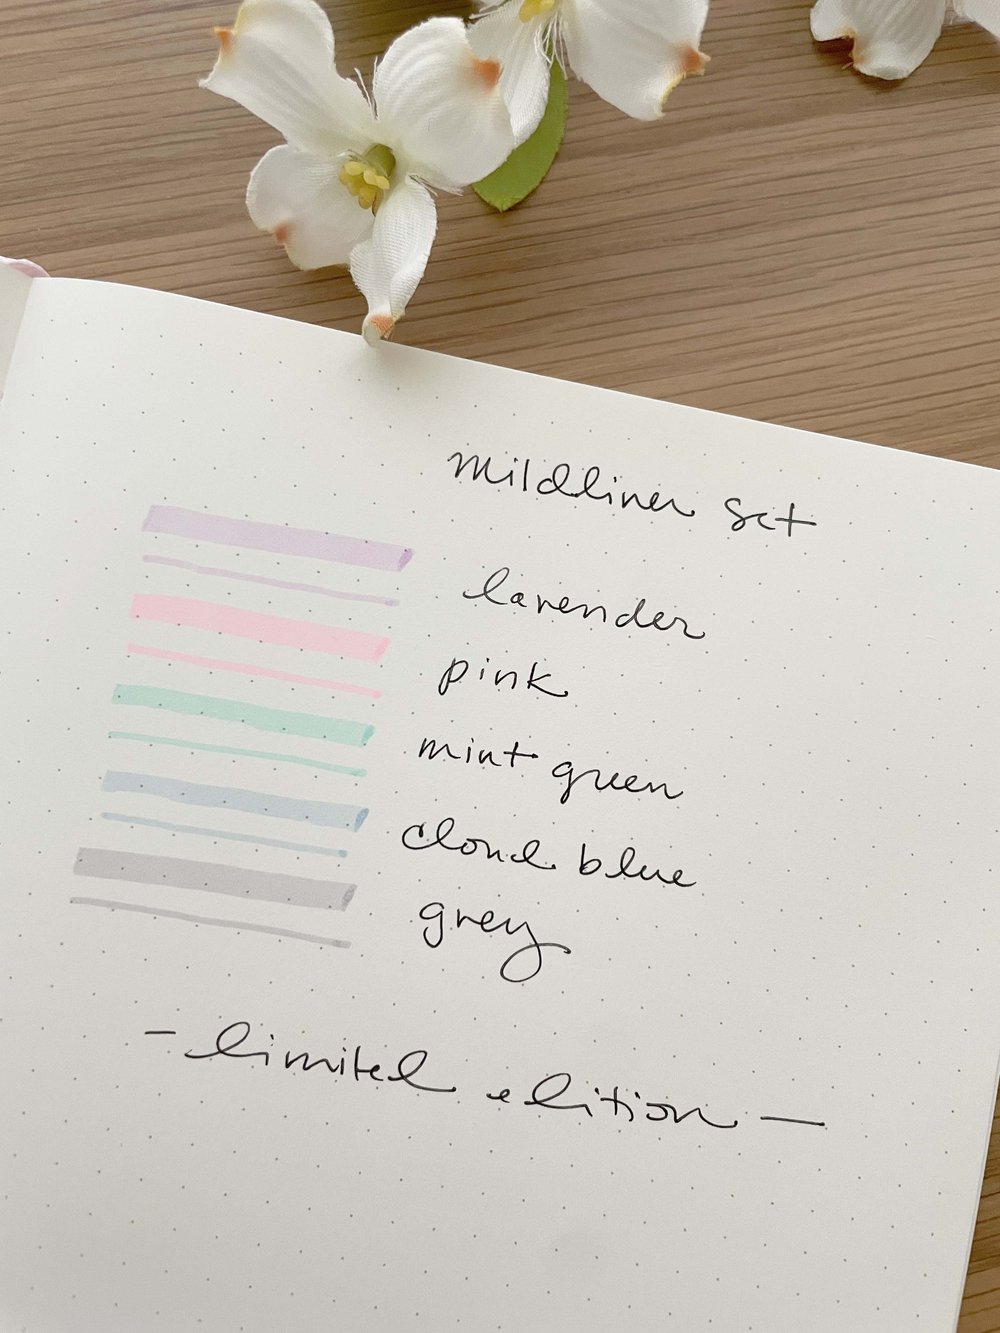 Zebra Mildliner - Two Sided Marker - Limited Edition Set A - Pelican and  Sloth — La Petite Cute Shop